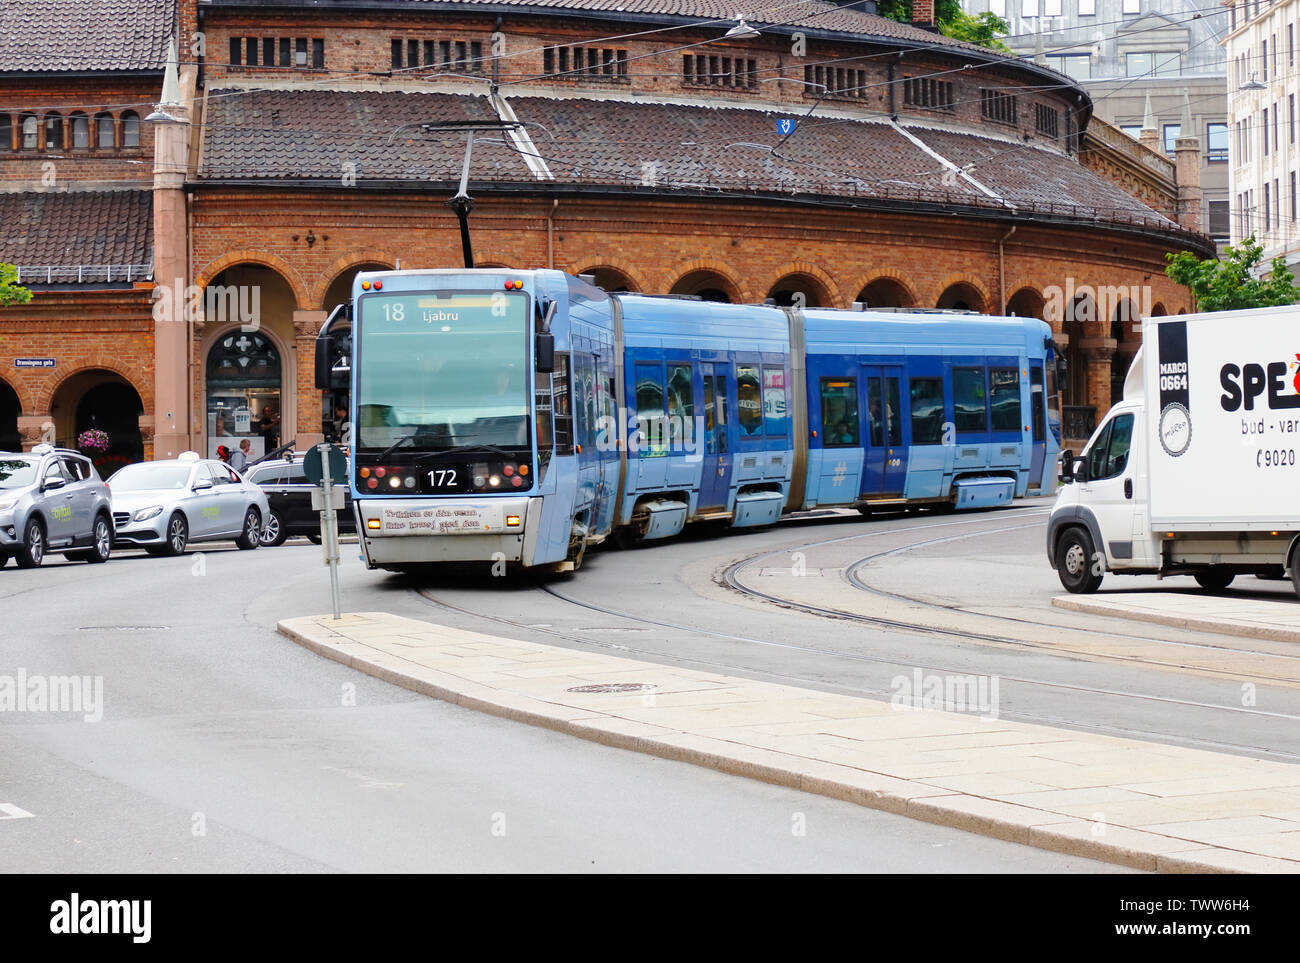 Oslo, Norway - June 20, 2019: Oslo low-flor articulated tram class SL95 near the Jerbanetorget square in service on line 18. Stock Photo